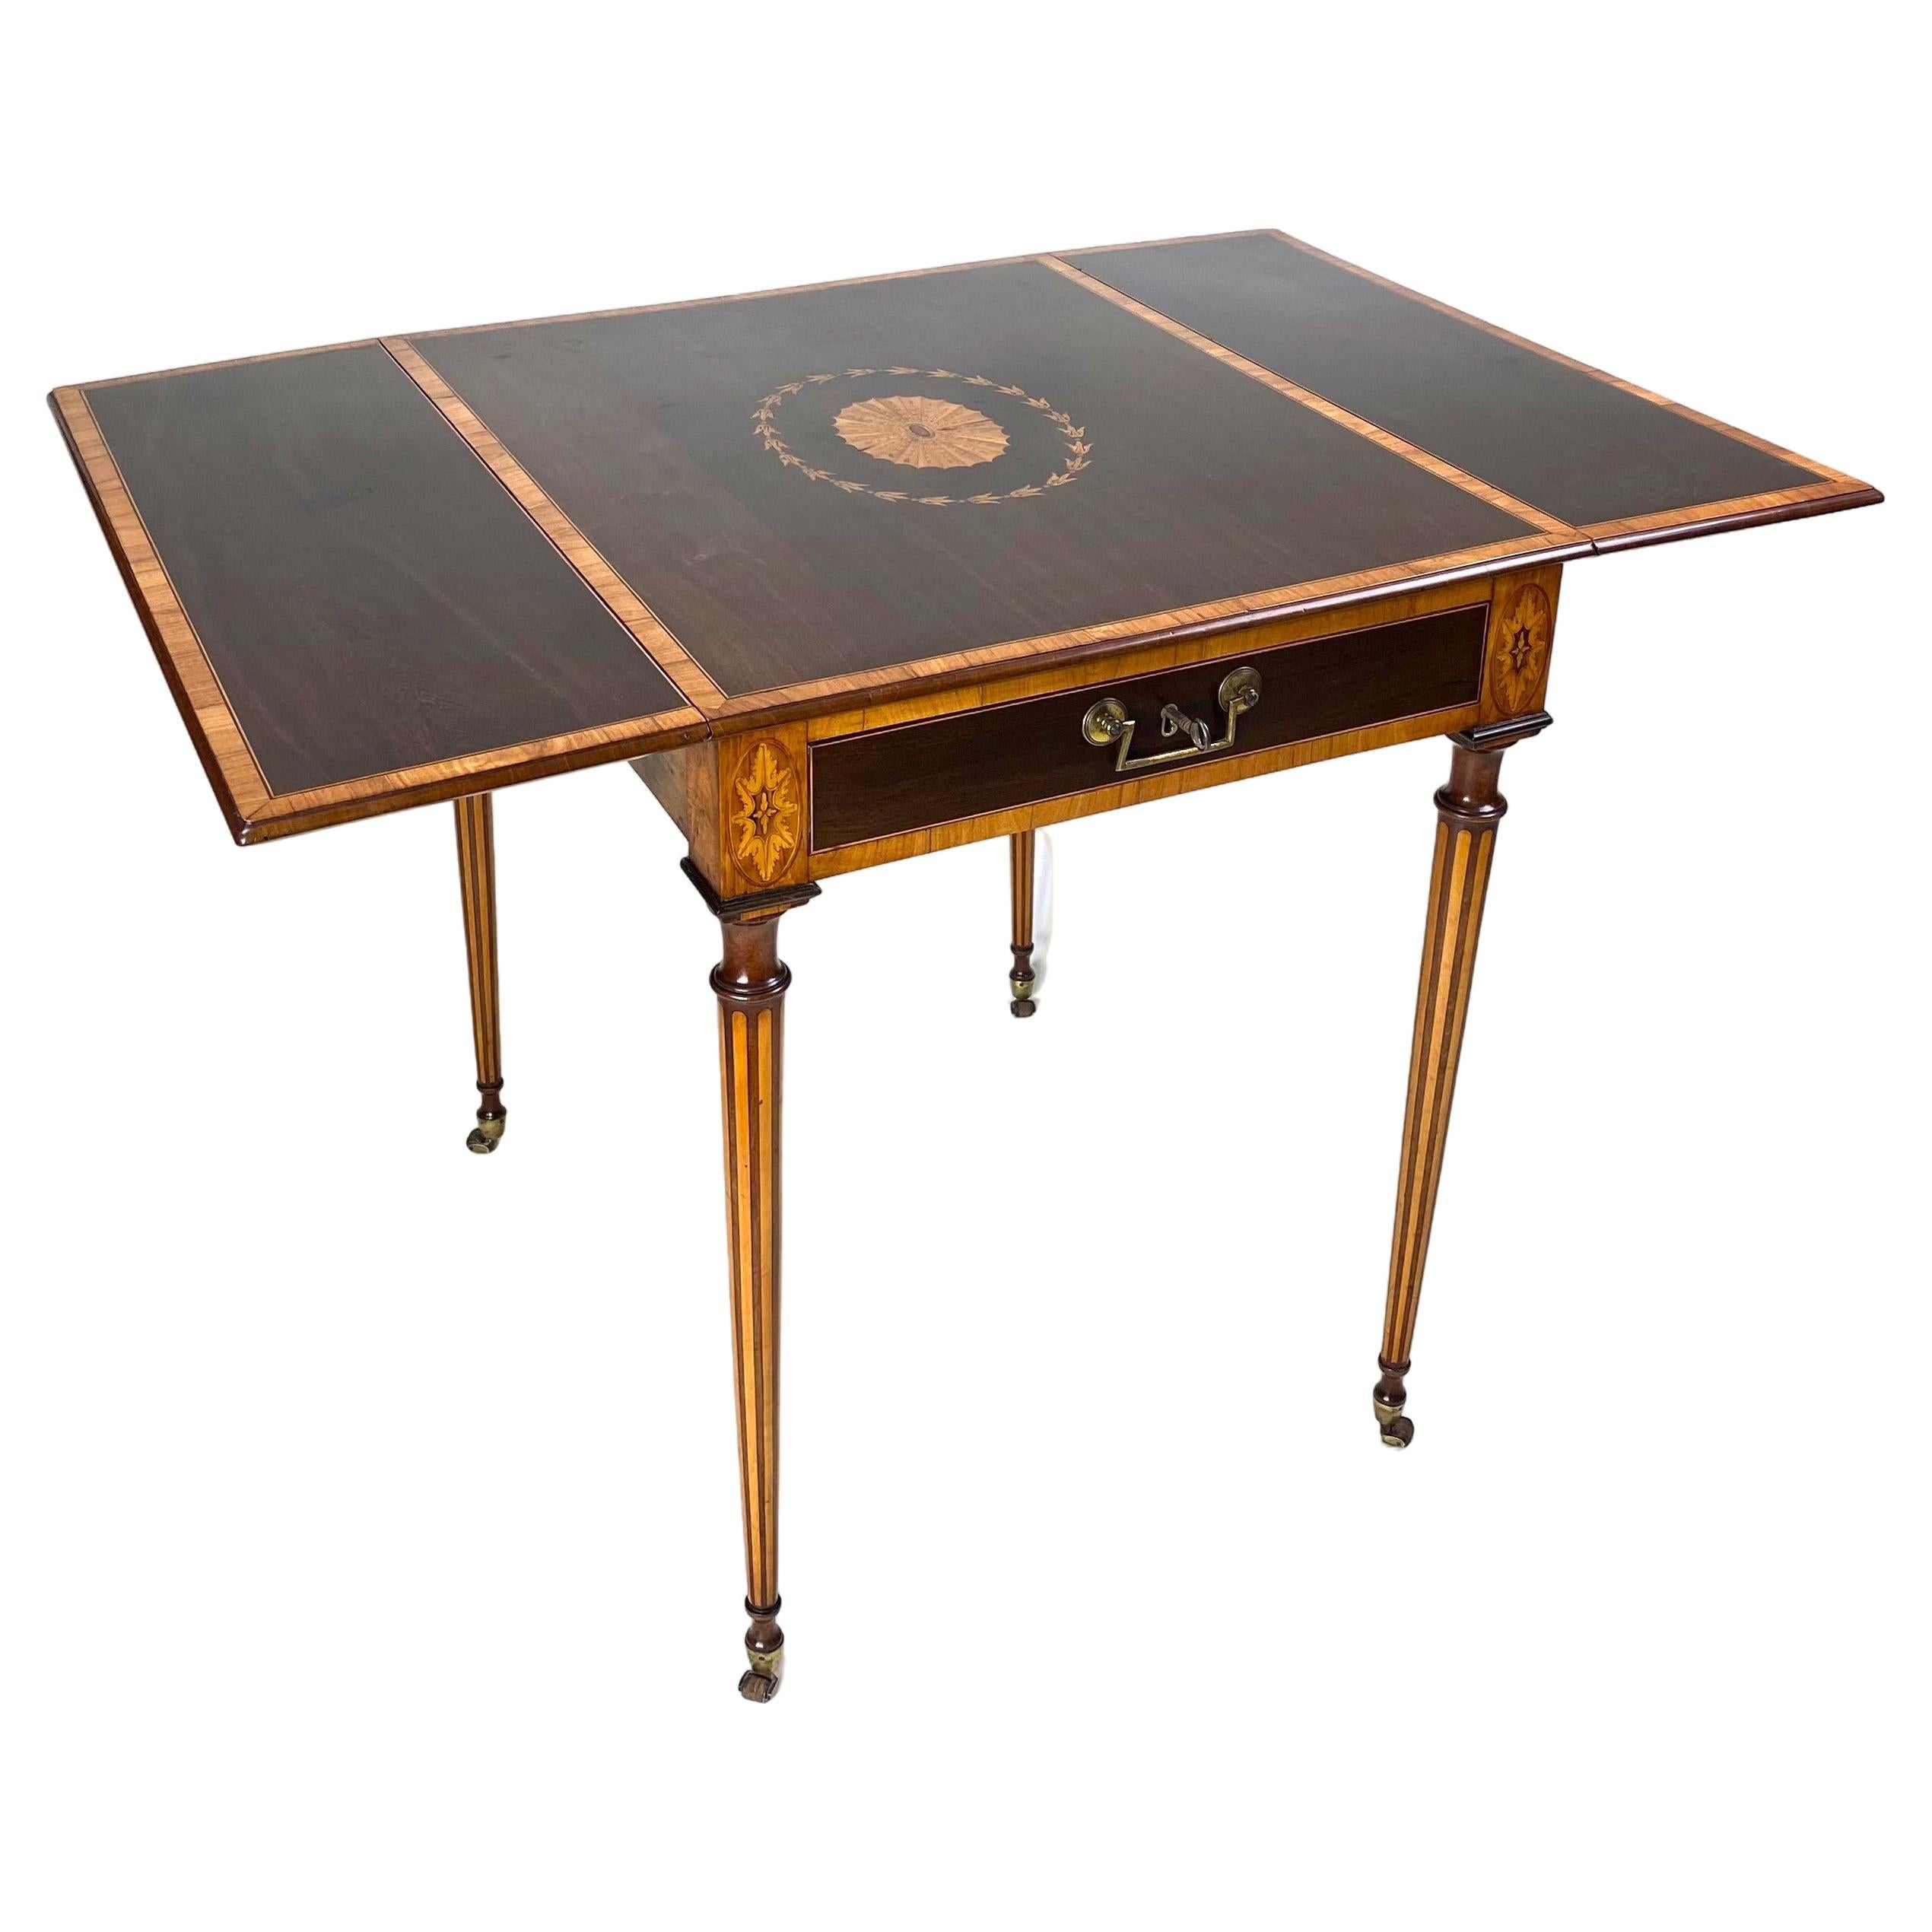 Pembroke table attributed to Ince and Mayhew For Sale